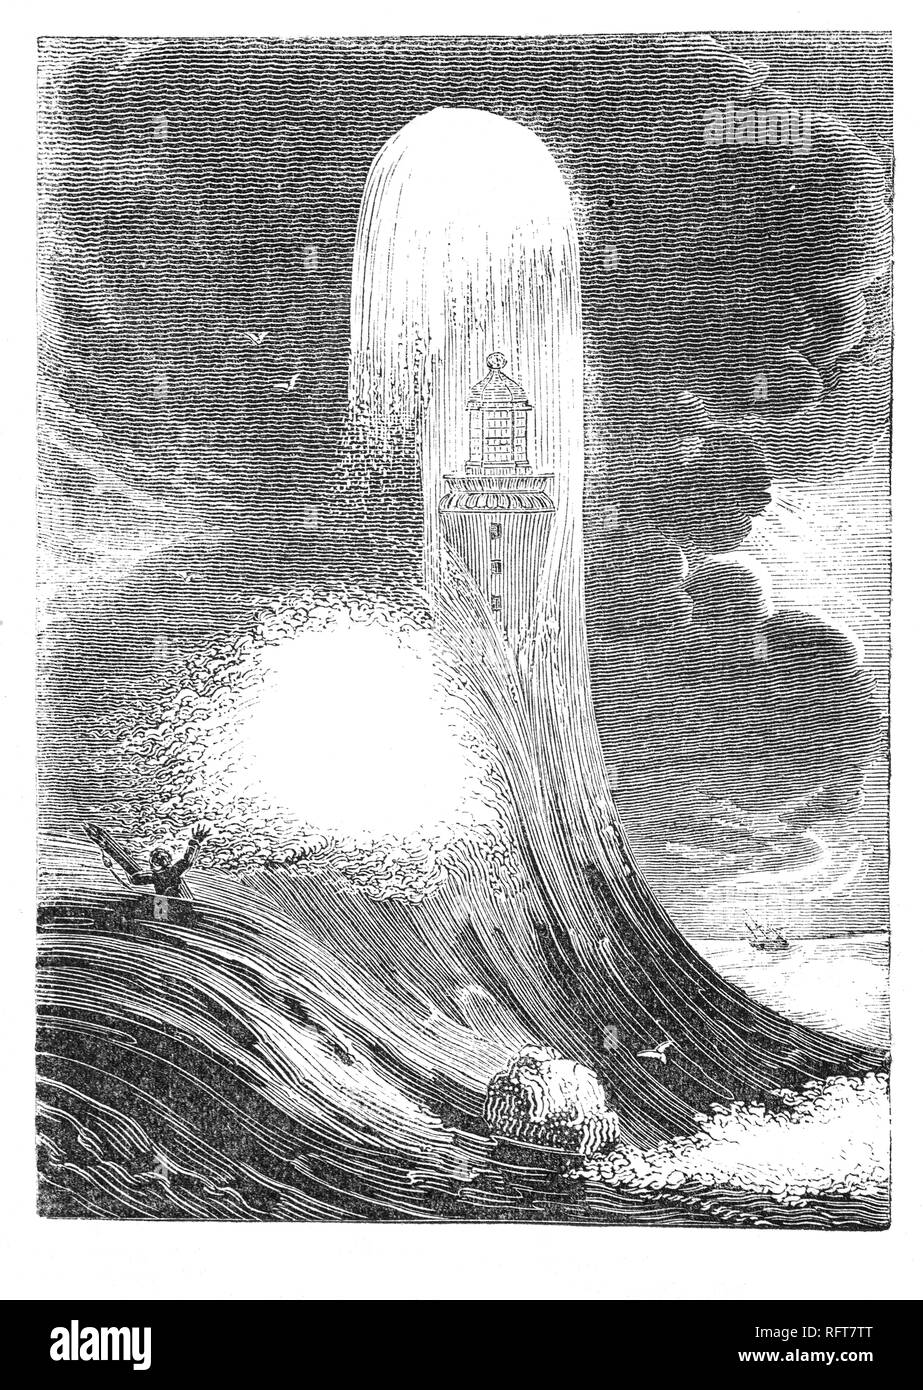 A massive wave hitting the third Eddystone Lighthouse on the dangerous Eddystone Rocks, south of Rame Head, England.  Designed  by the Royal Society, civil engineer John Smeaton modelled the shape on an oak tree, built of granite blocks. He pioneered 'hydraulic lime', a concrete that cured under water, and developed a technique of securing the granite blocks using dovetail joints and marble dowels. Construction started in 1756 at Millbay and the light was first lit on 16 October 1759. In 1841 major renovations were made and it remained in use until 1877 and was rebuilt on Plymouth Hoe. Stock Photo